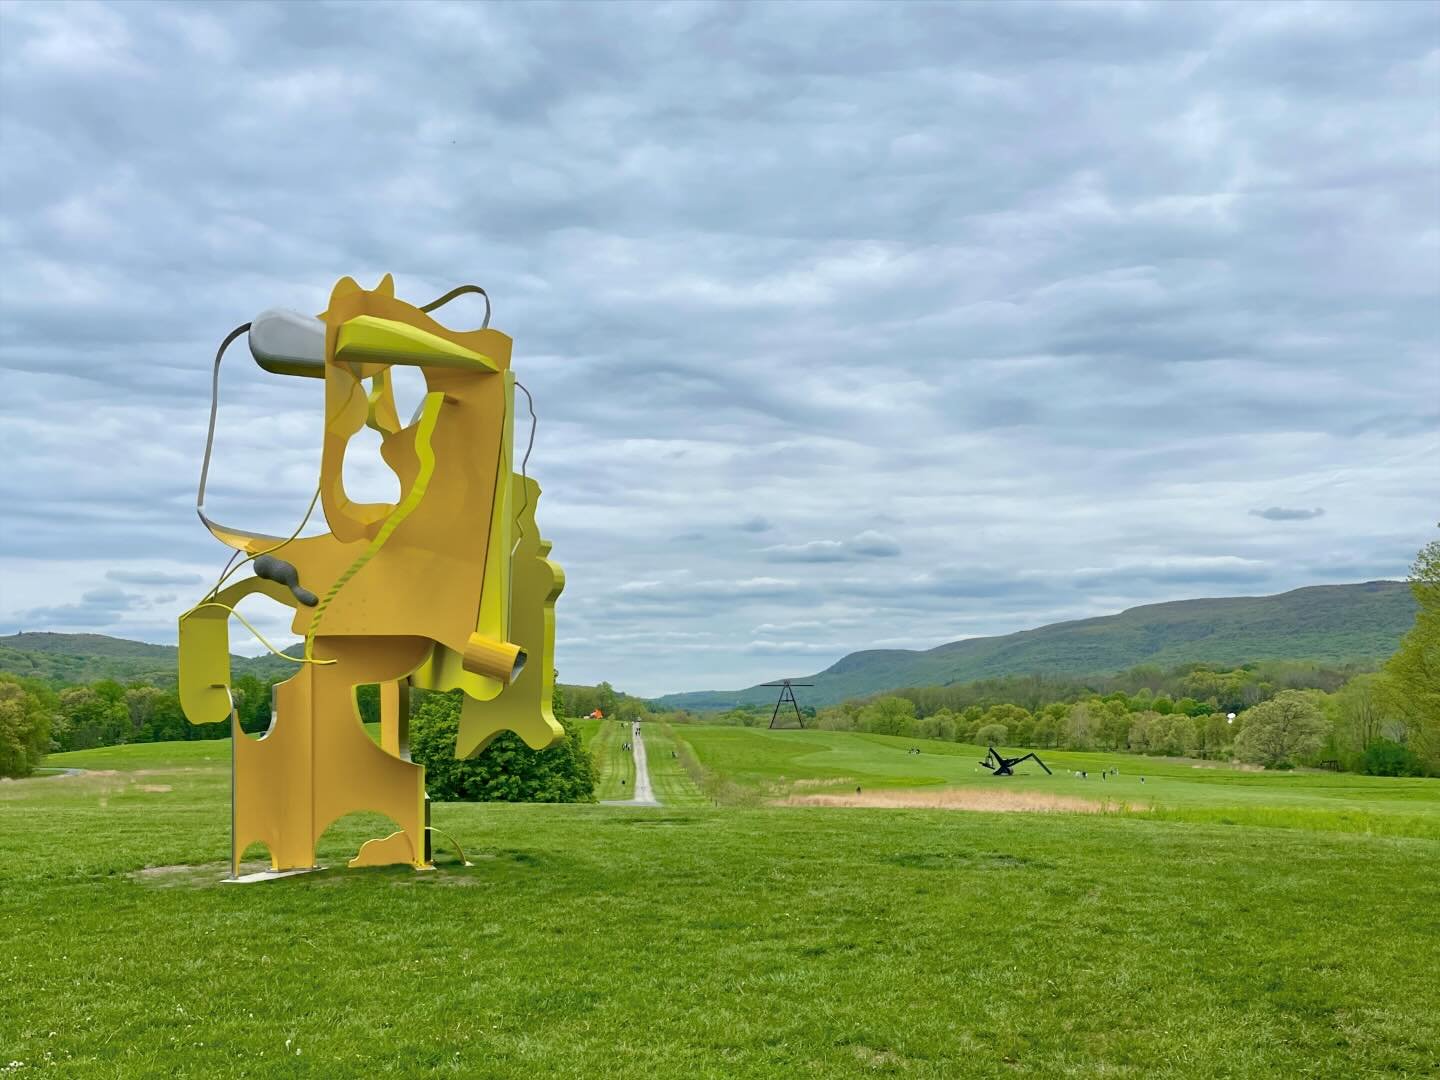 Congratulations to the amazing Arlene Shechet on the opening of &ldquo;Girl Group&rdquo; &mdash; six monumental metal sculptures &mdash; sited throughout Storm King with wonderful correspondences between them and works installed indoors. I love how a